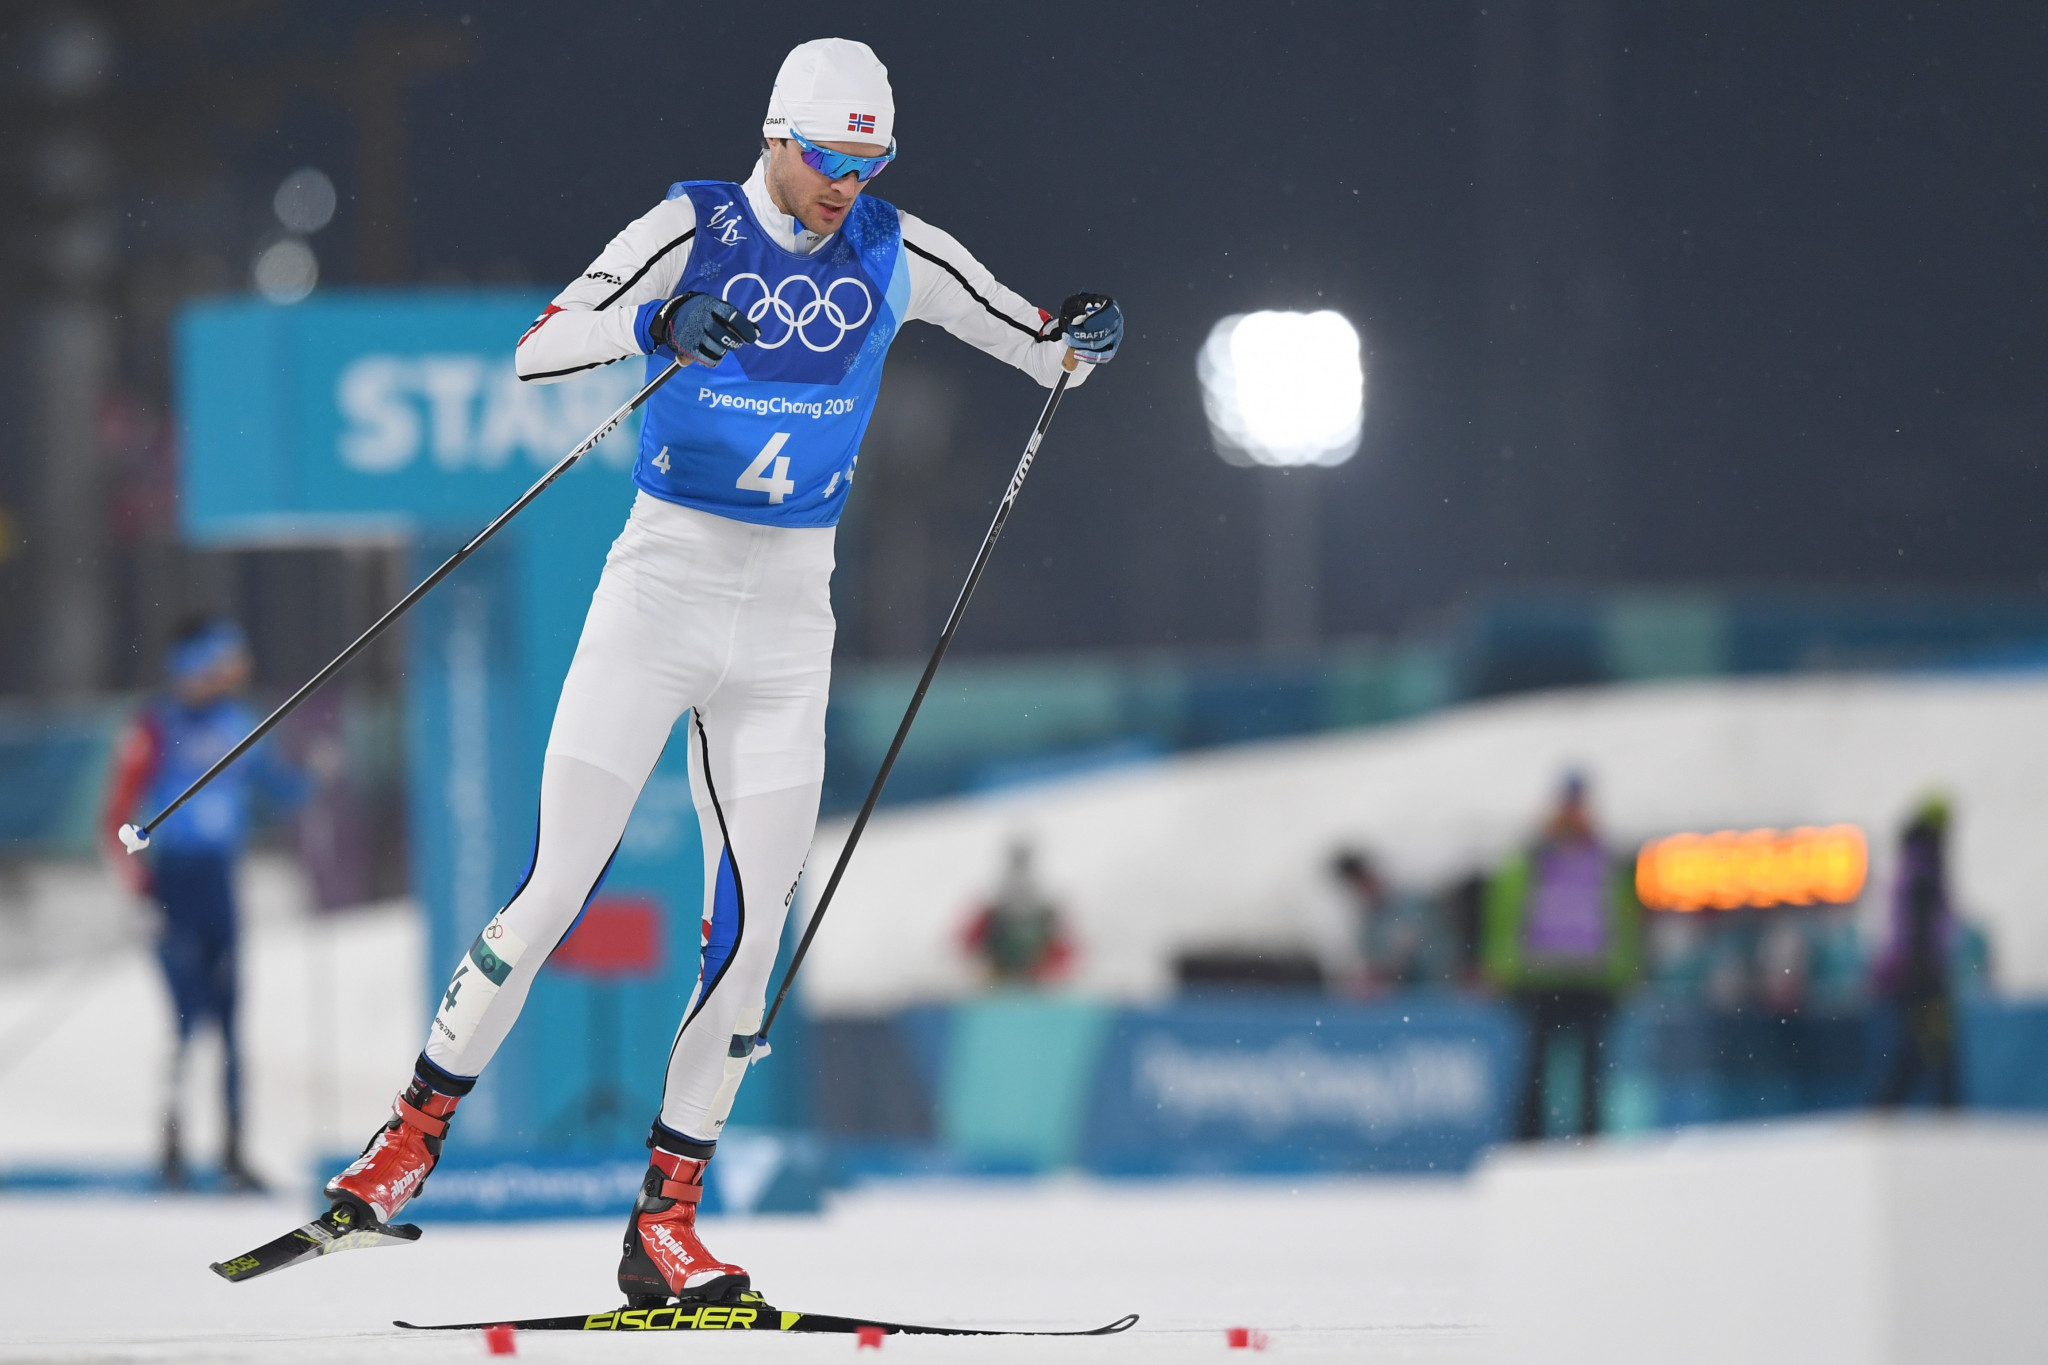 Joergen Graabak sealed a second-place finish for Norway ©Getty Images